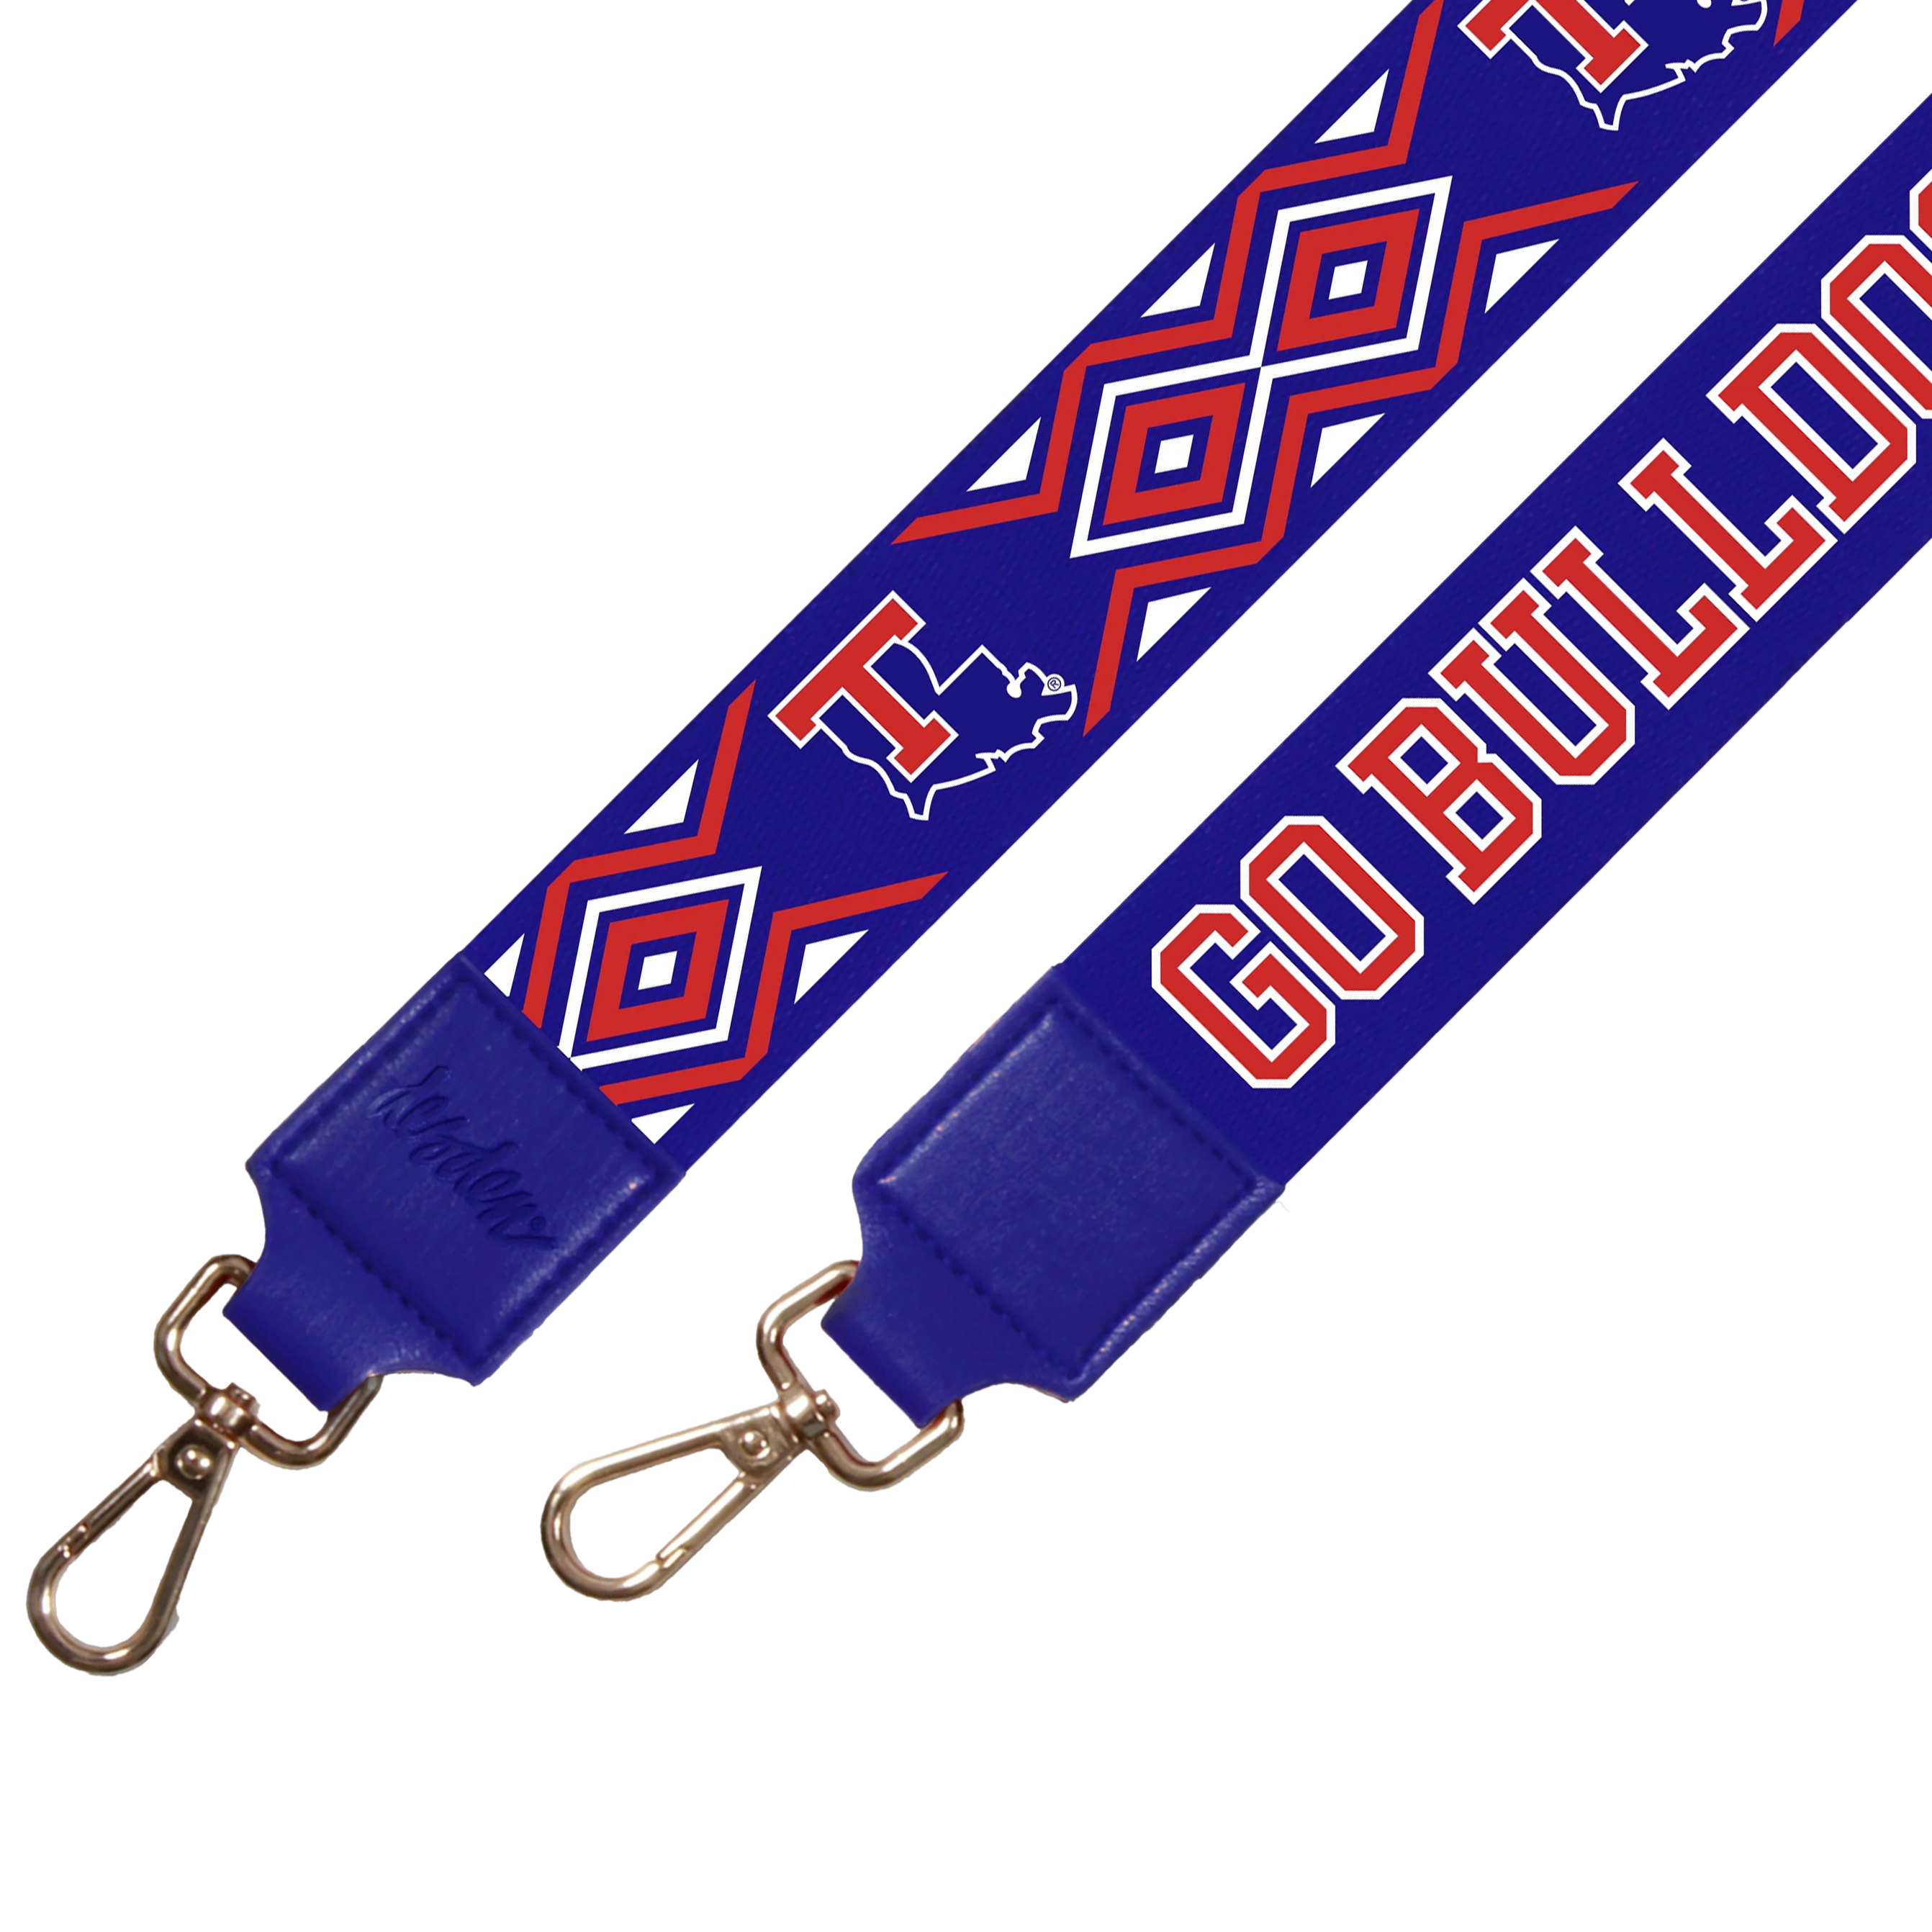 LOUISIANA TECH 2" - Officially Licensed - Ikat Design